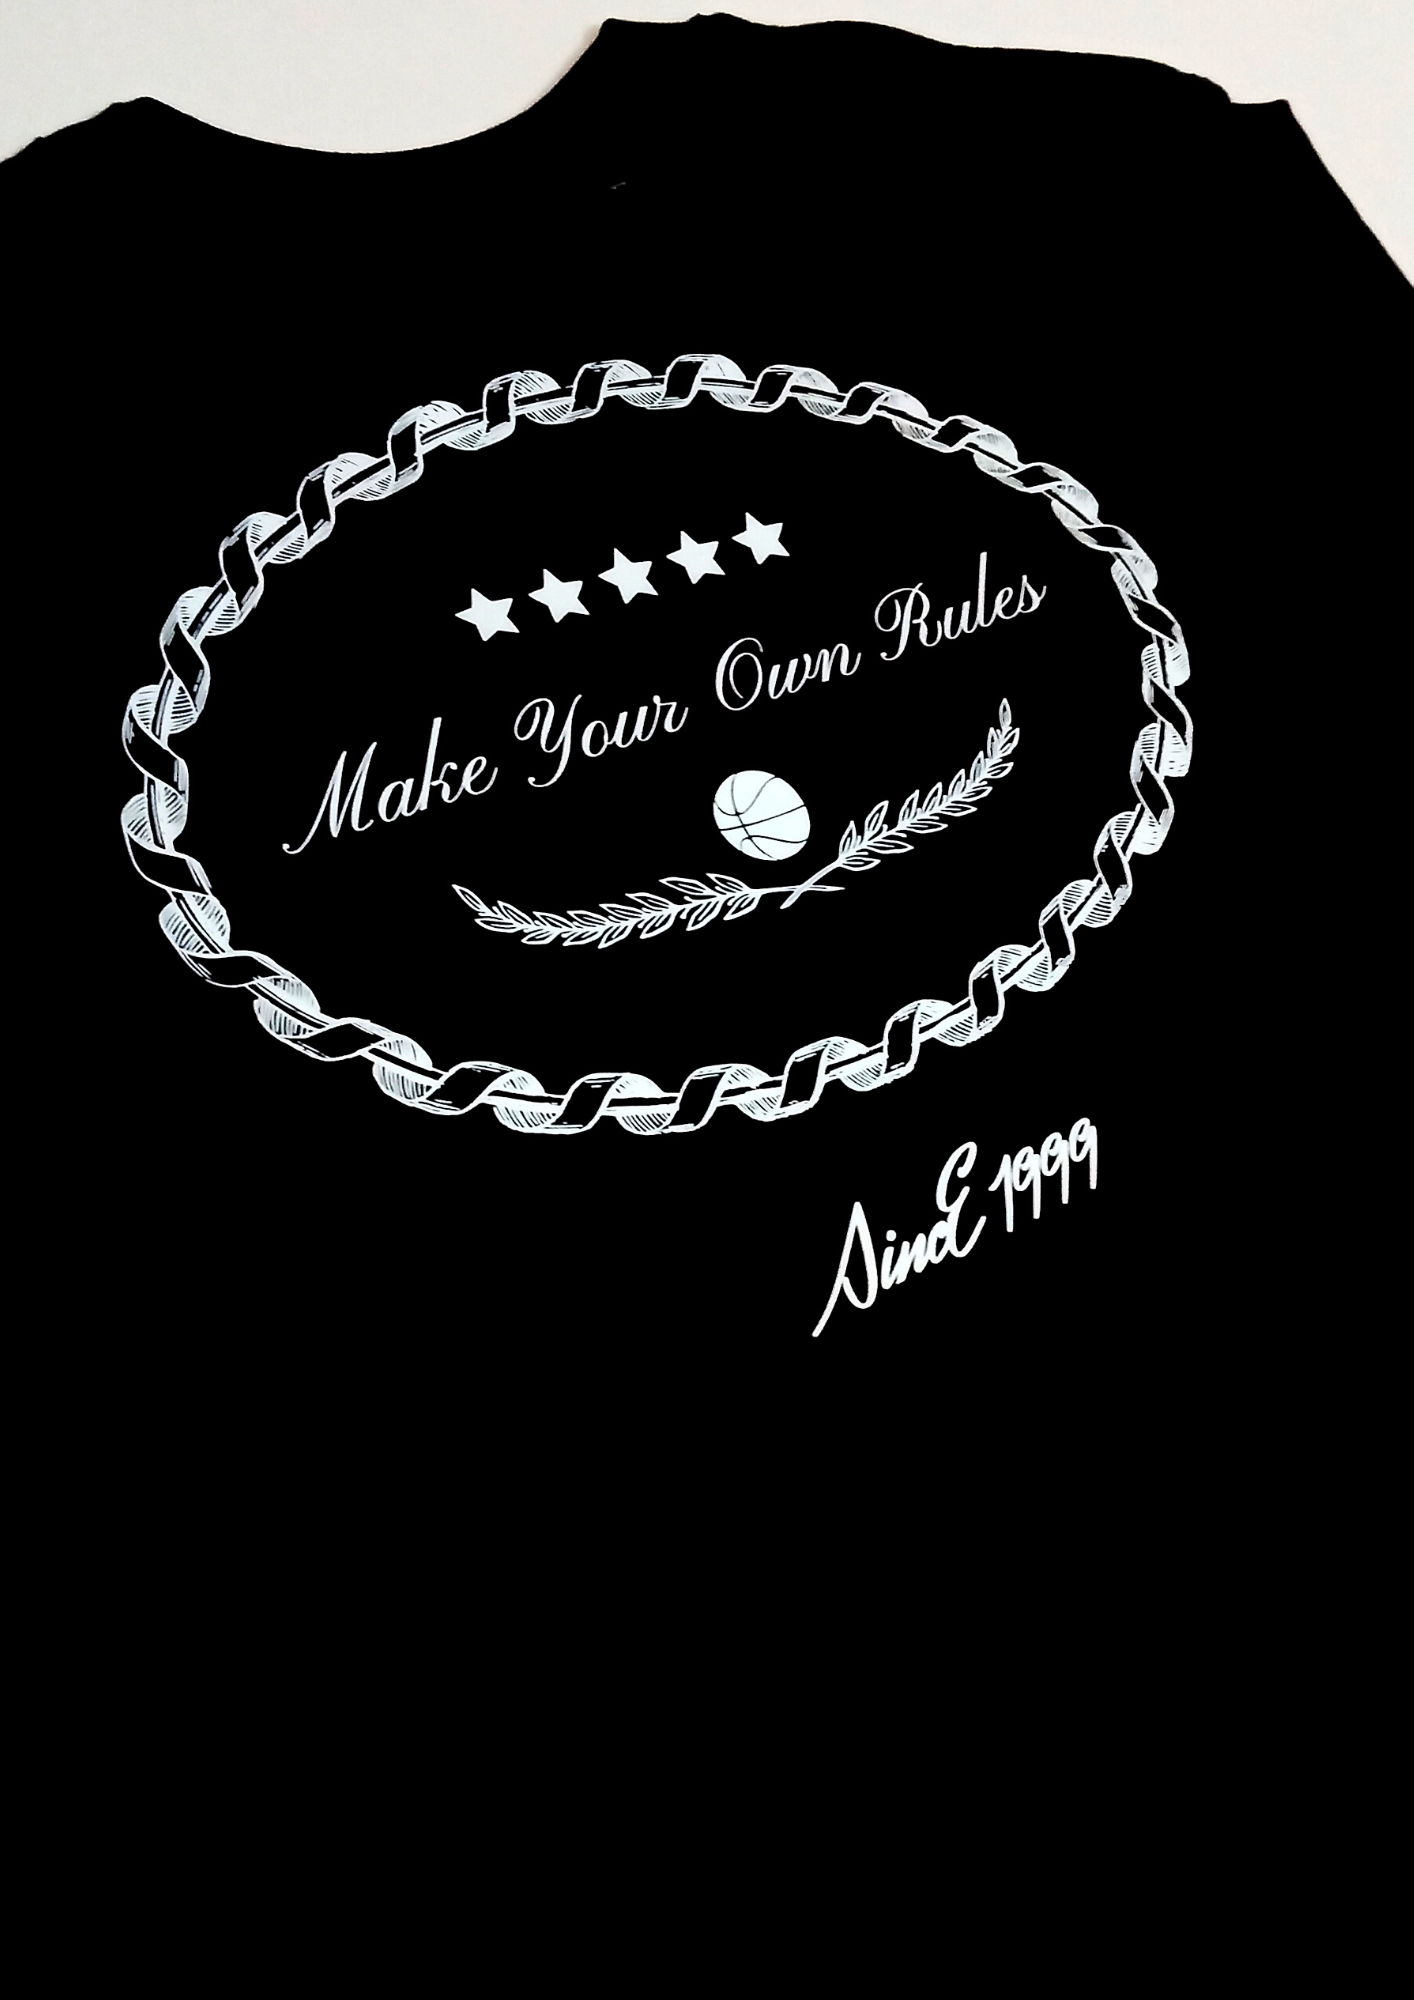 MAKE YOUR OWN RULES T-SHIRT 001